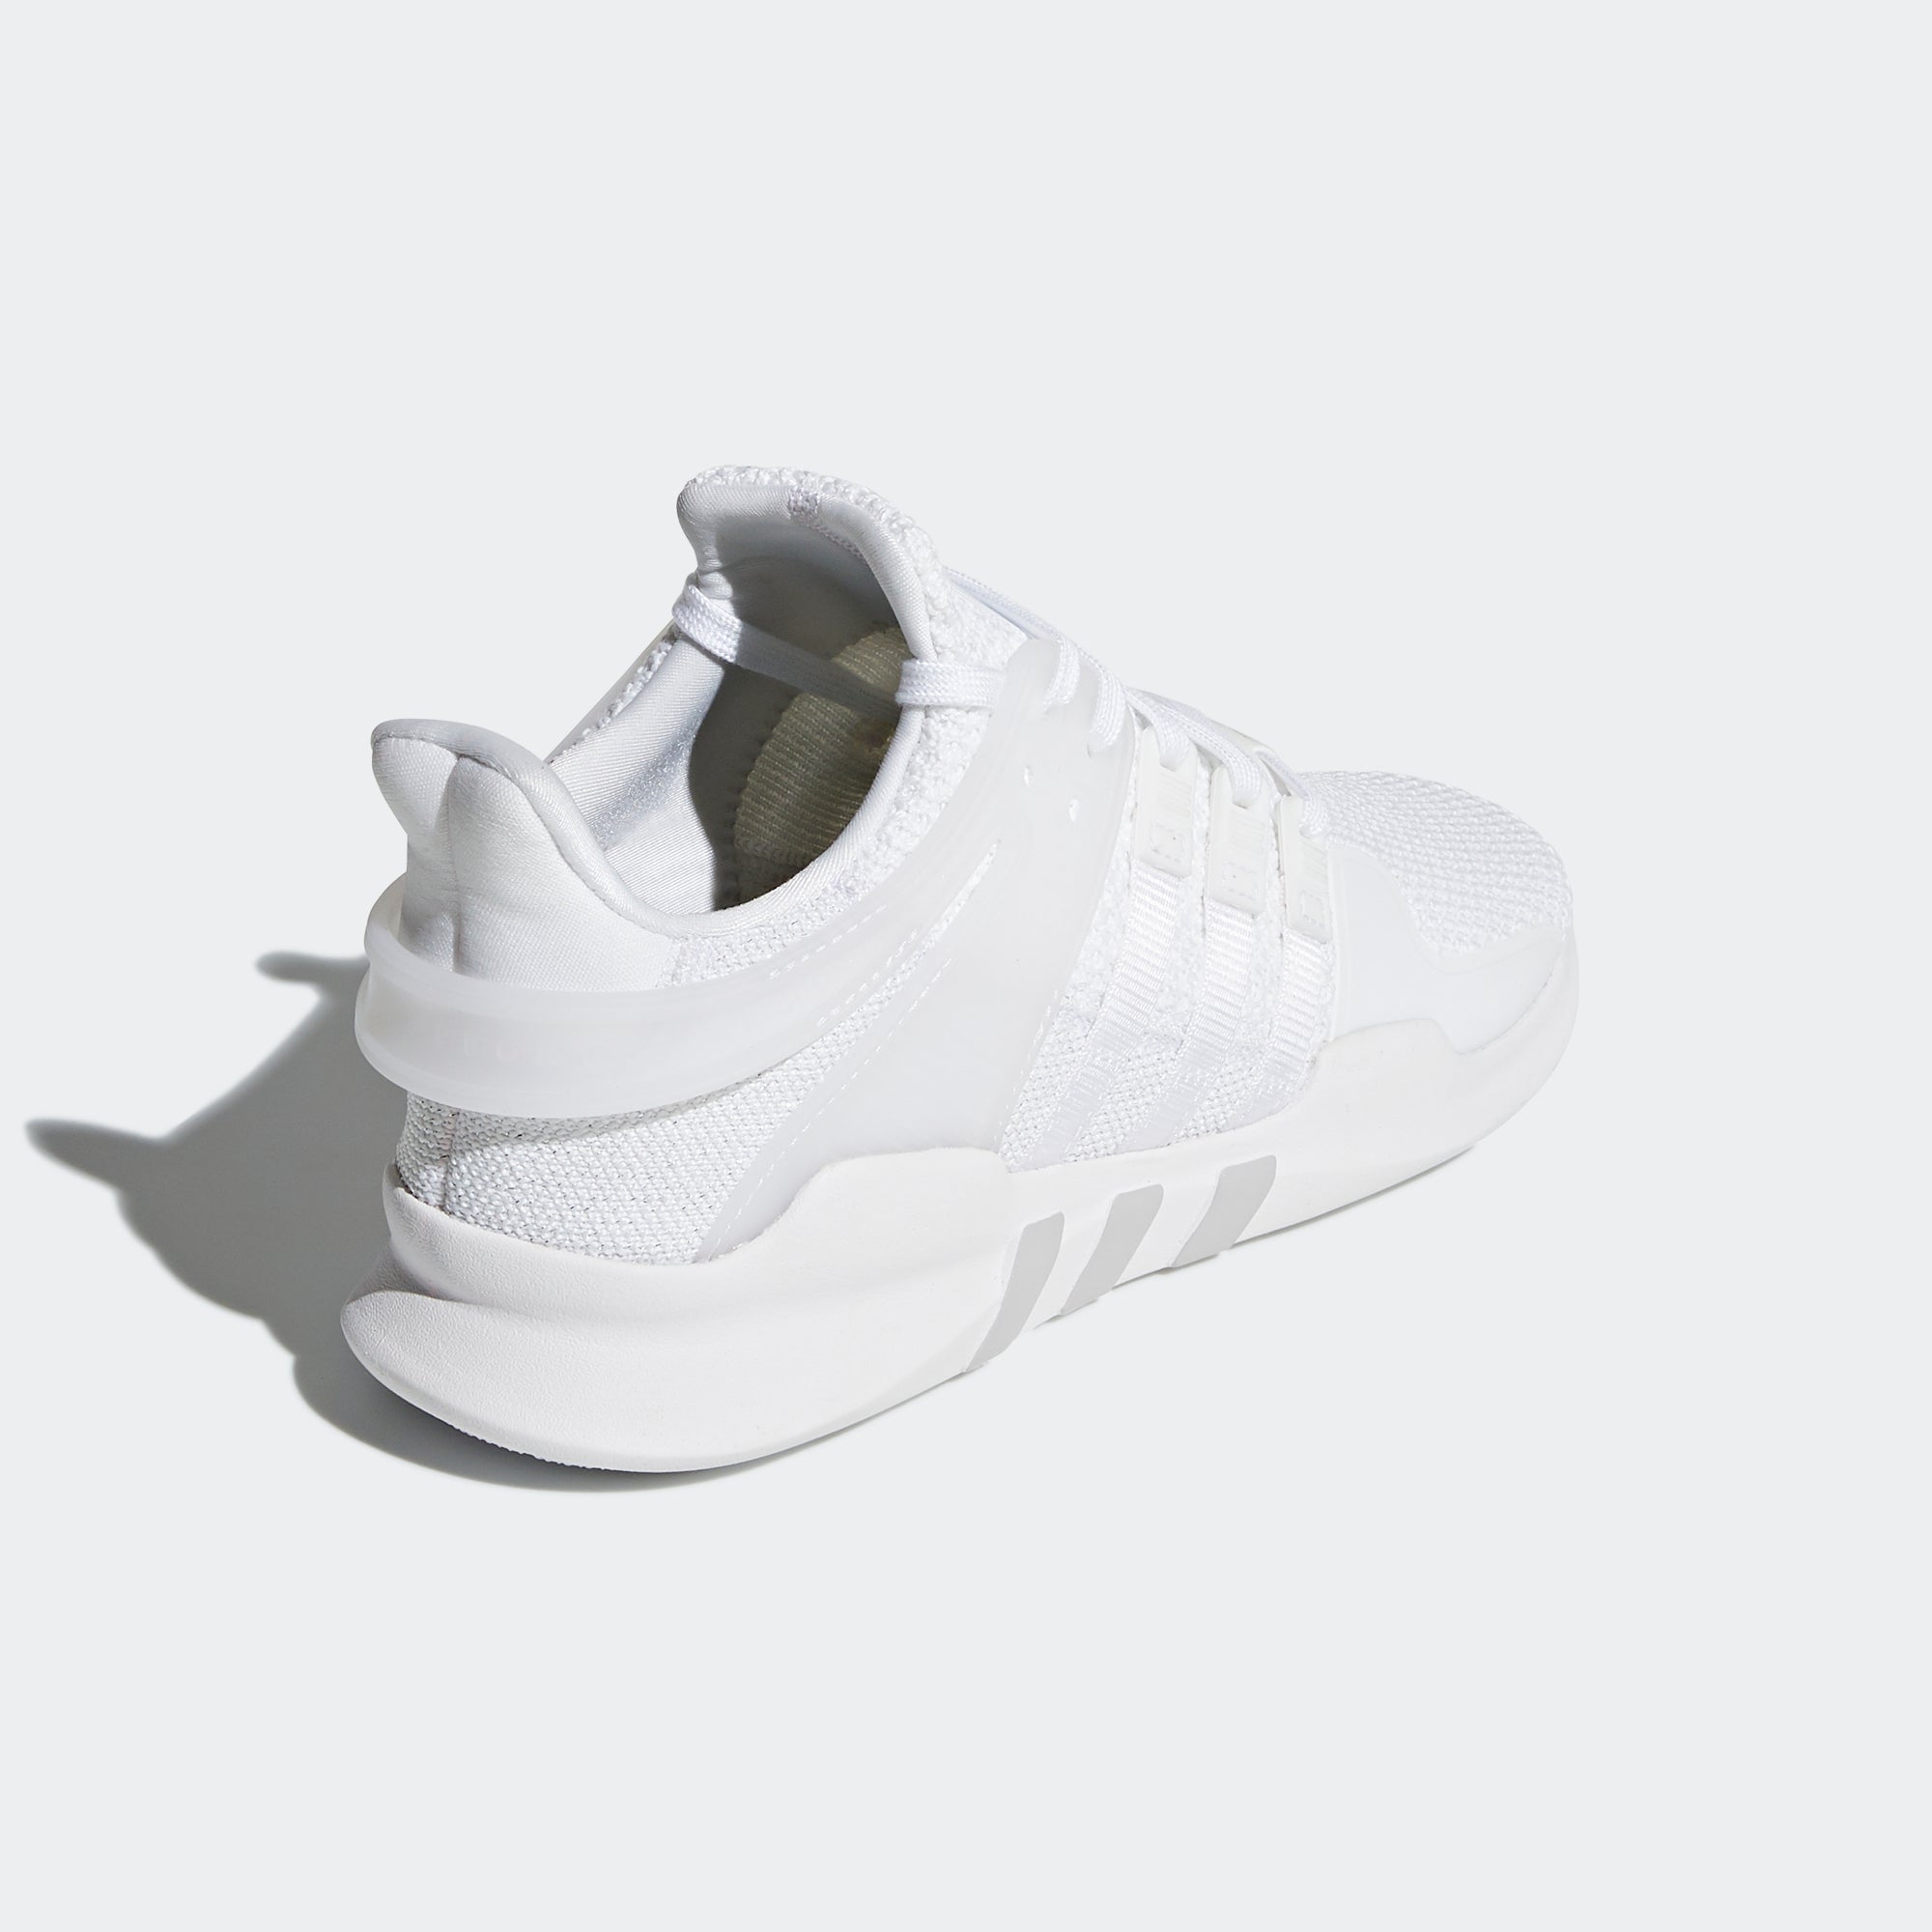 Adidas Eqt Support Adv Shoes Cloud White Grey Aq0916 Chicago City Sports